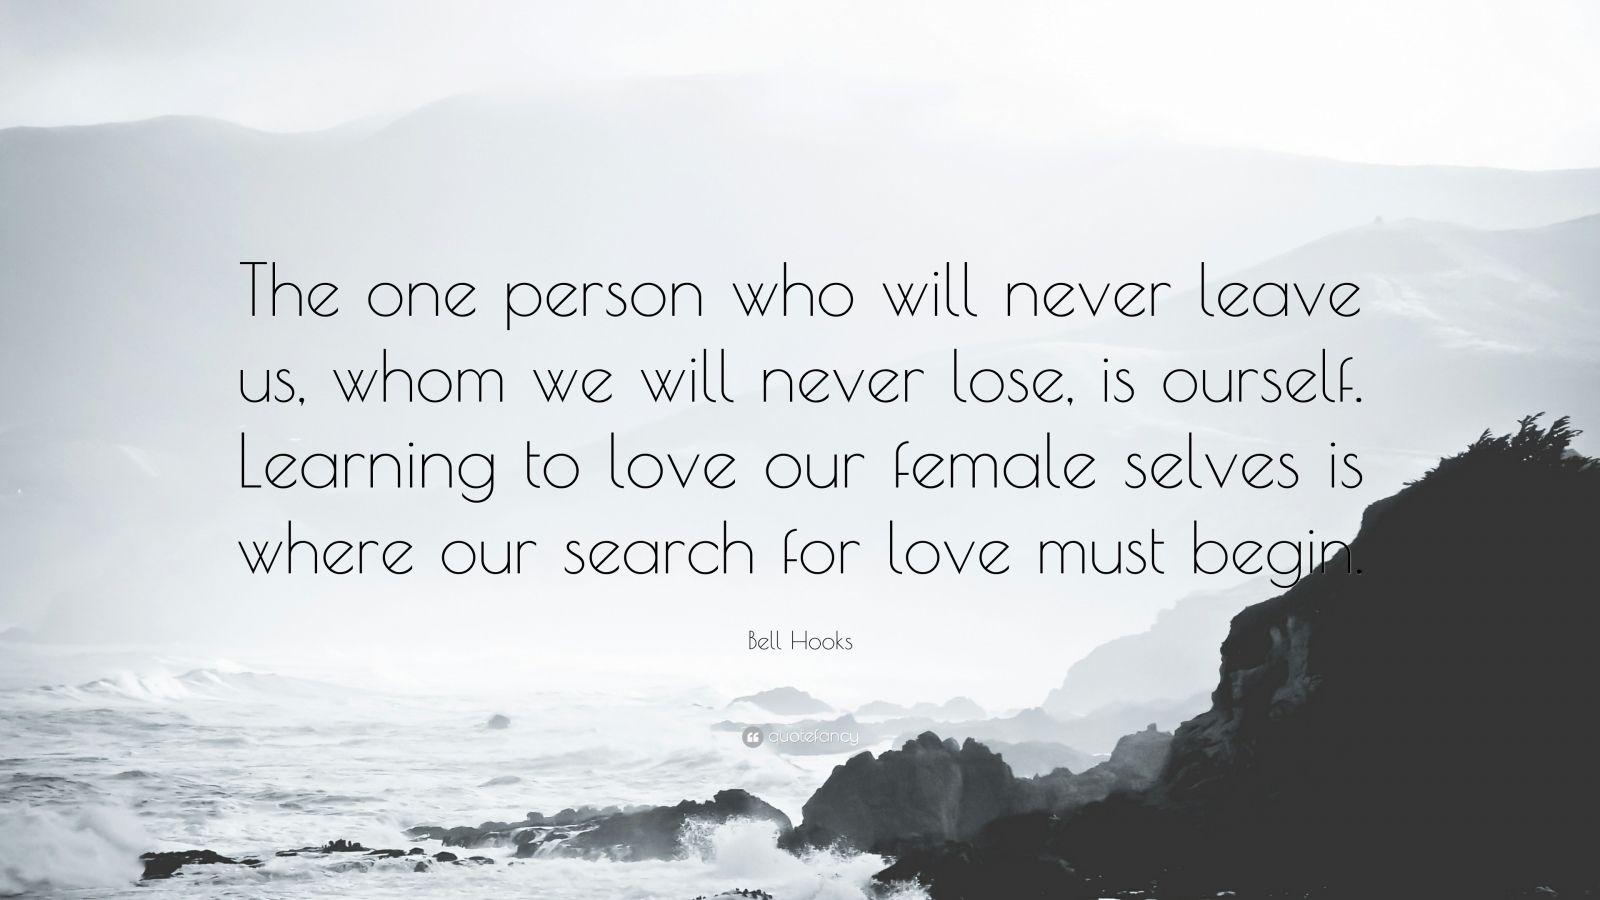 Bell Hooks Quote: “The one person who will never leave us, whom we will